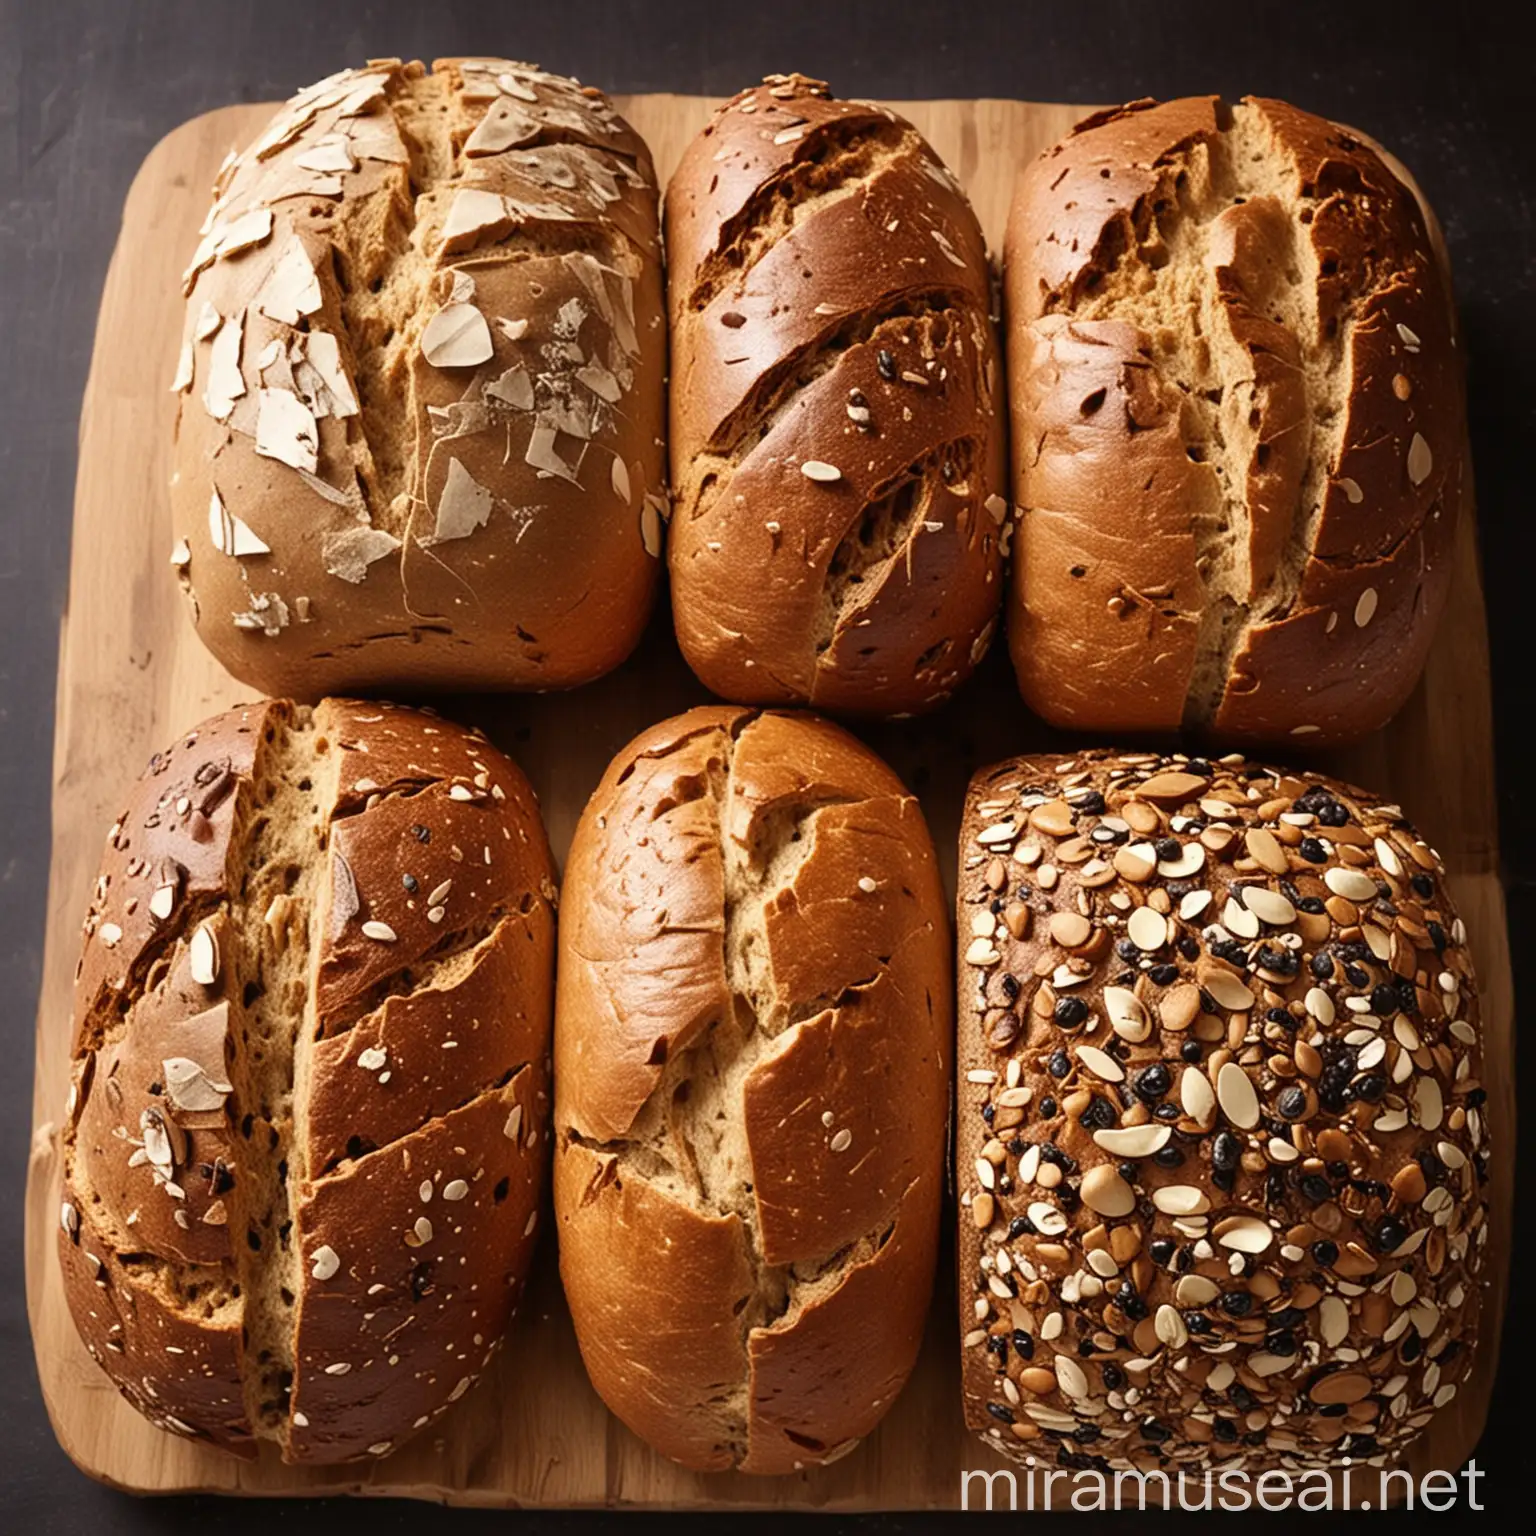 5 healthy breads